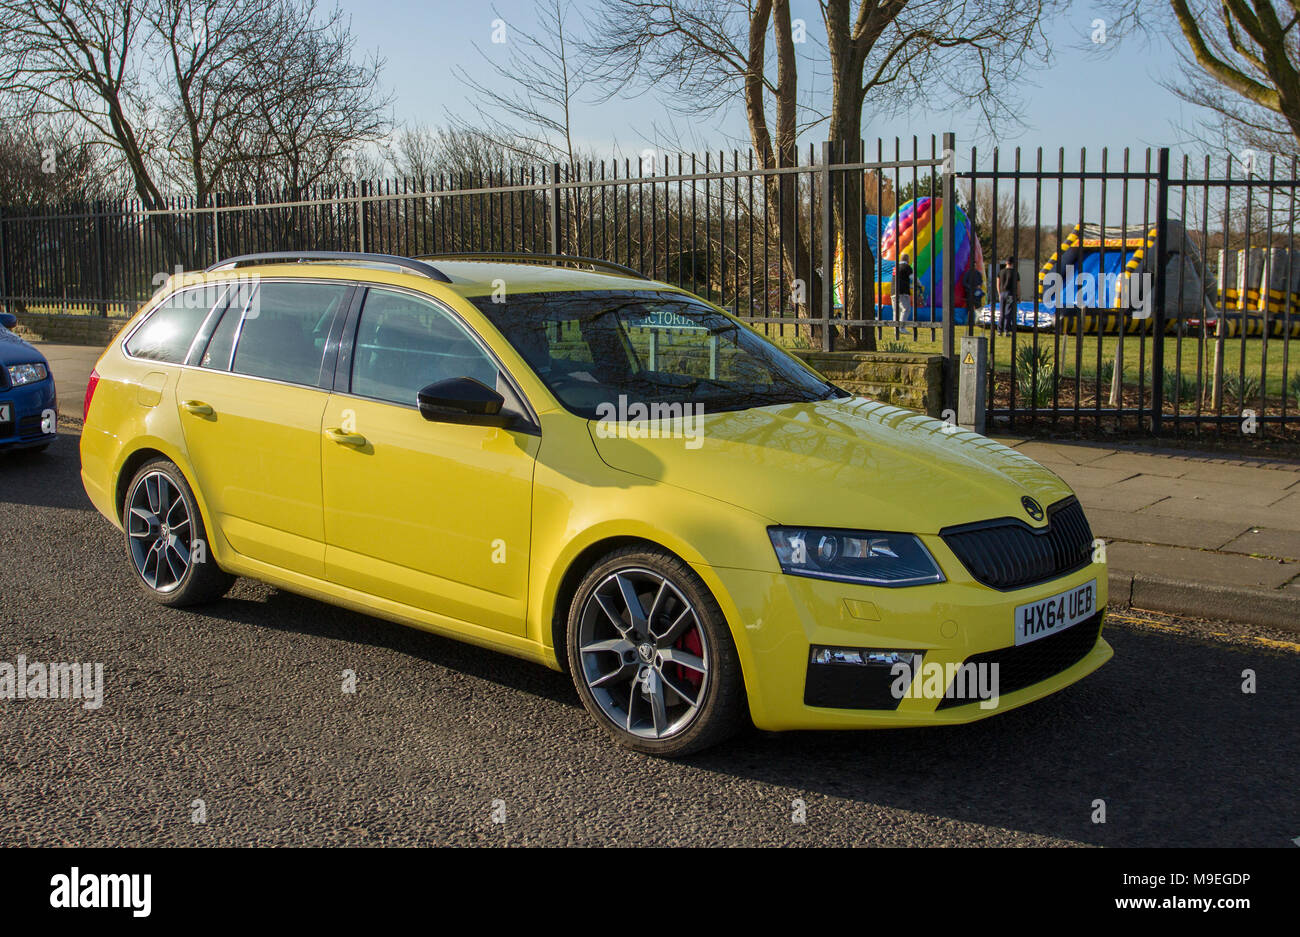 2014 yellow Škoda Octavia VRS TDI CR at Southport, Merseyside, .  Cars and tourists arrive in the coastal resort on a warm spring day. Cars are bumper to bumper on the seafront esplanade car enthusiasts take advantage of warm weather for a motoring day out. Stock Photo